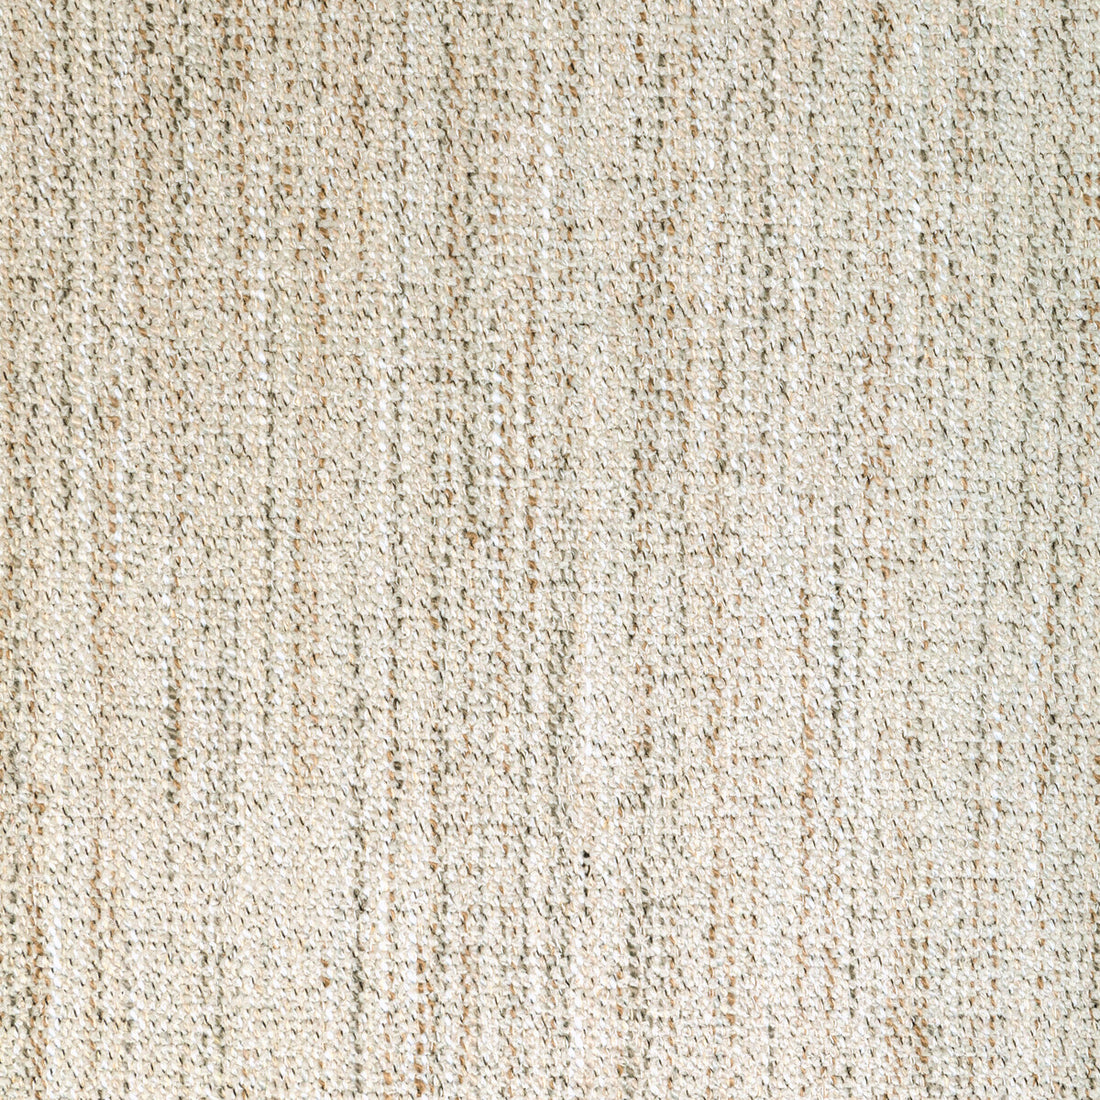 Delfino fabric in oatmeal color - pattern 36748.106.0 - by Kravet Contract in the Refined Textures Performance Crypton collection